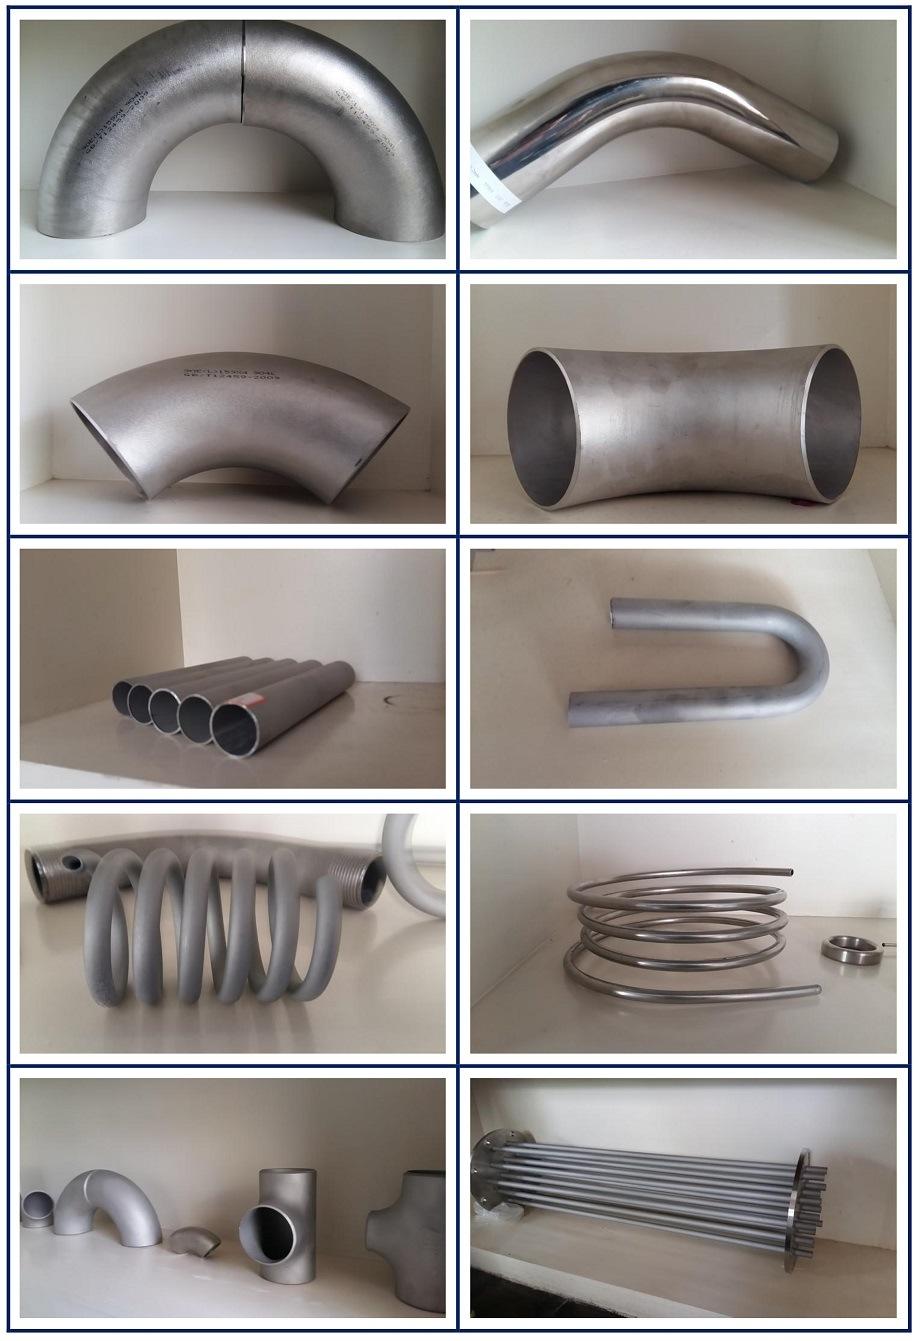 22mm Stainless Steel Compression Fittings Price